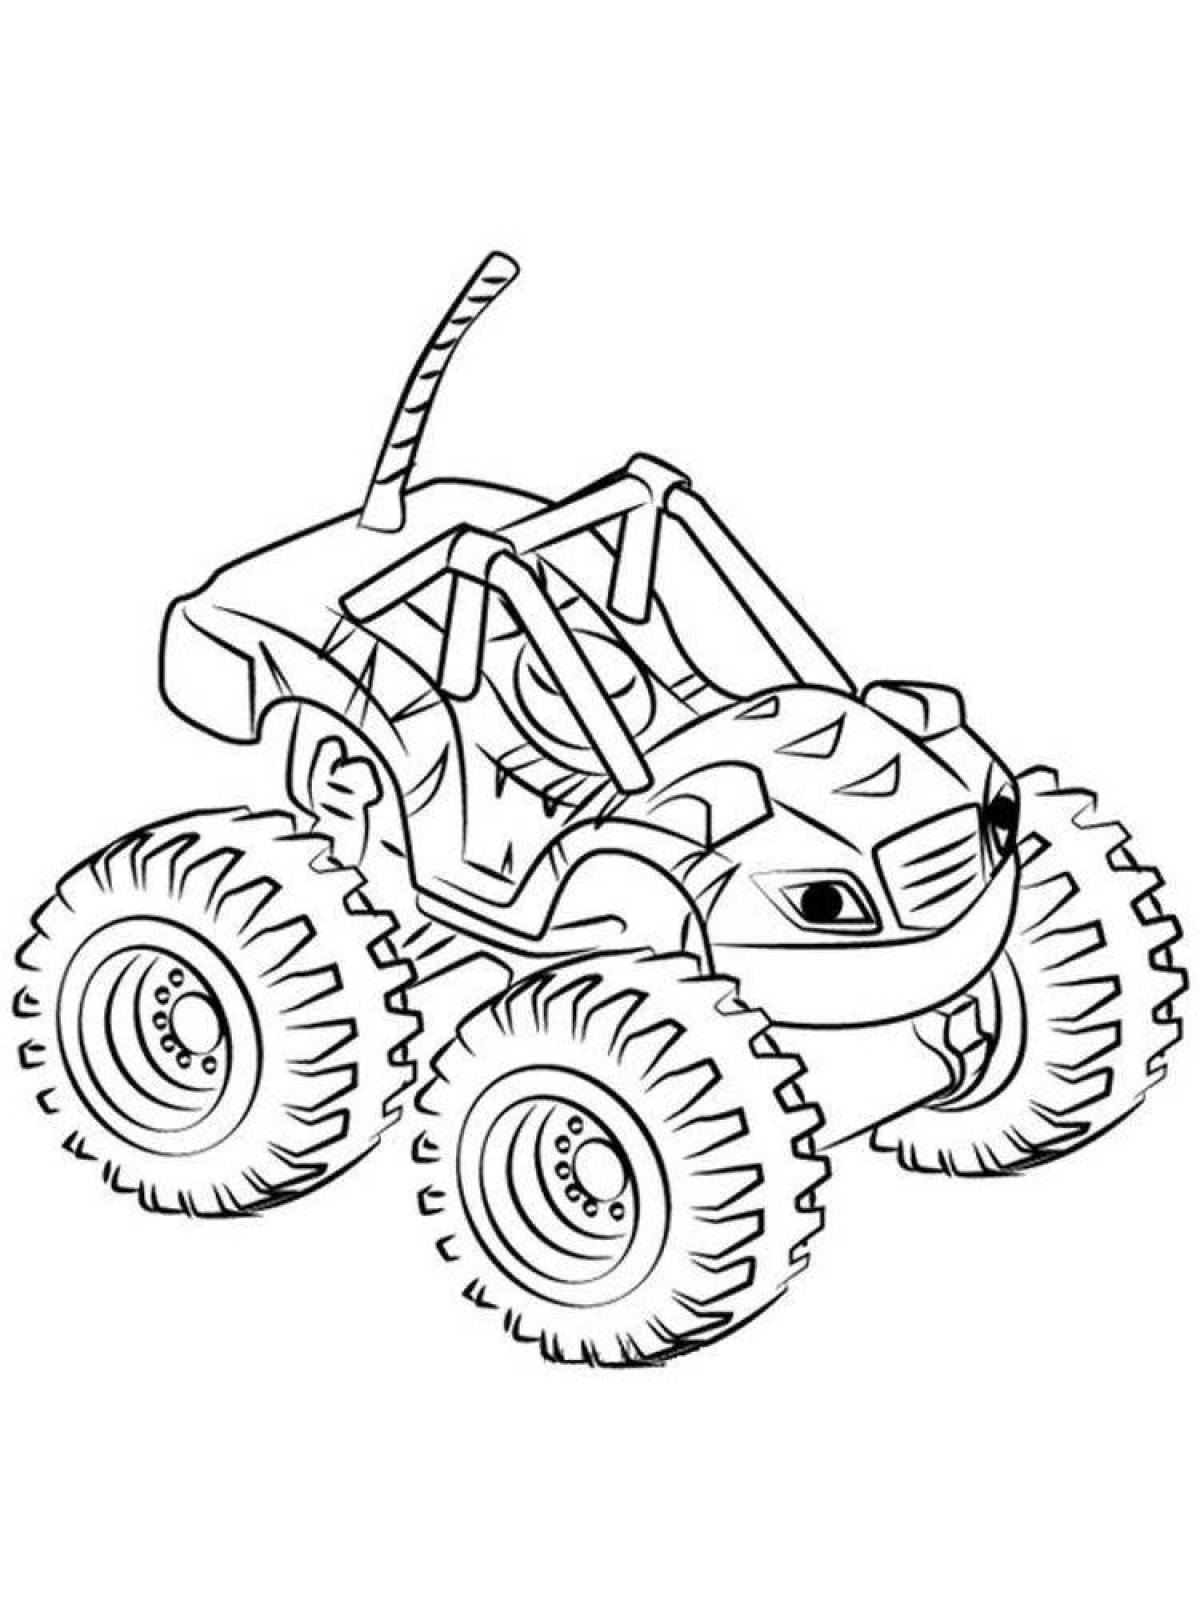 Playful growl coloring page